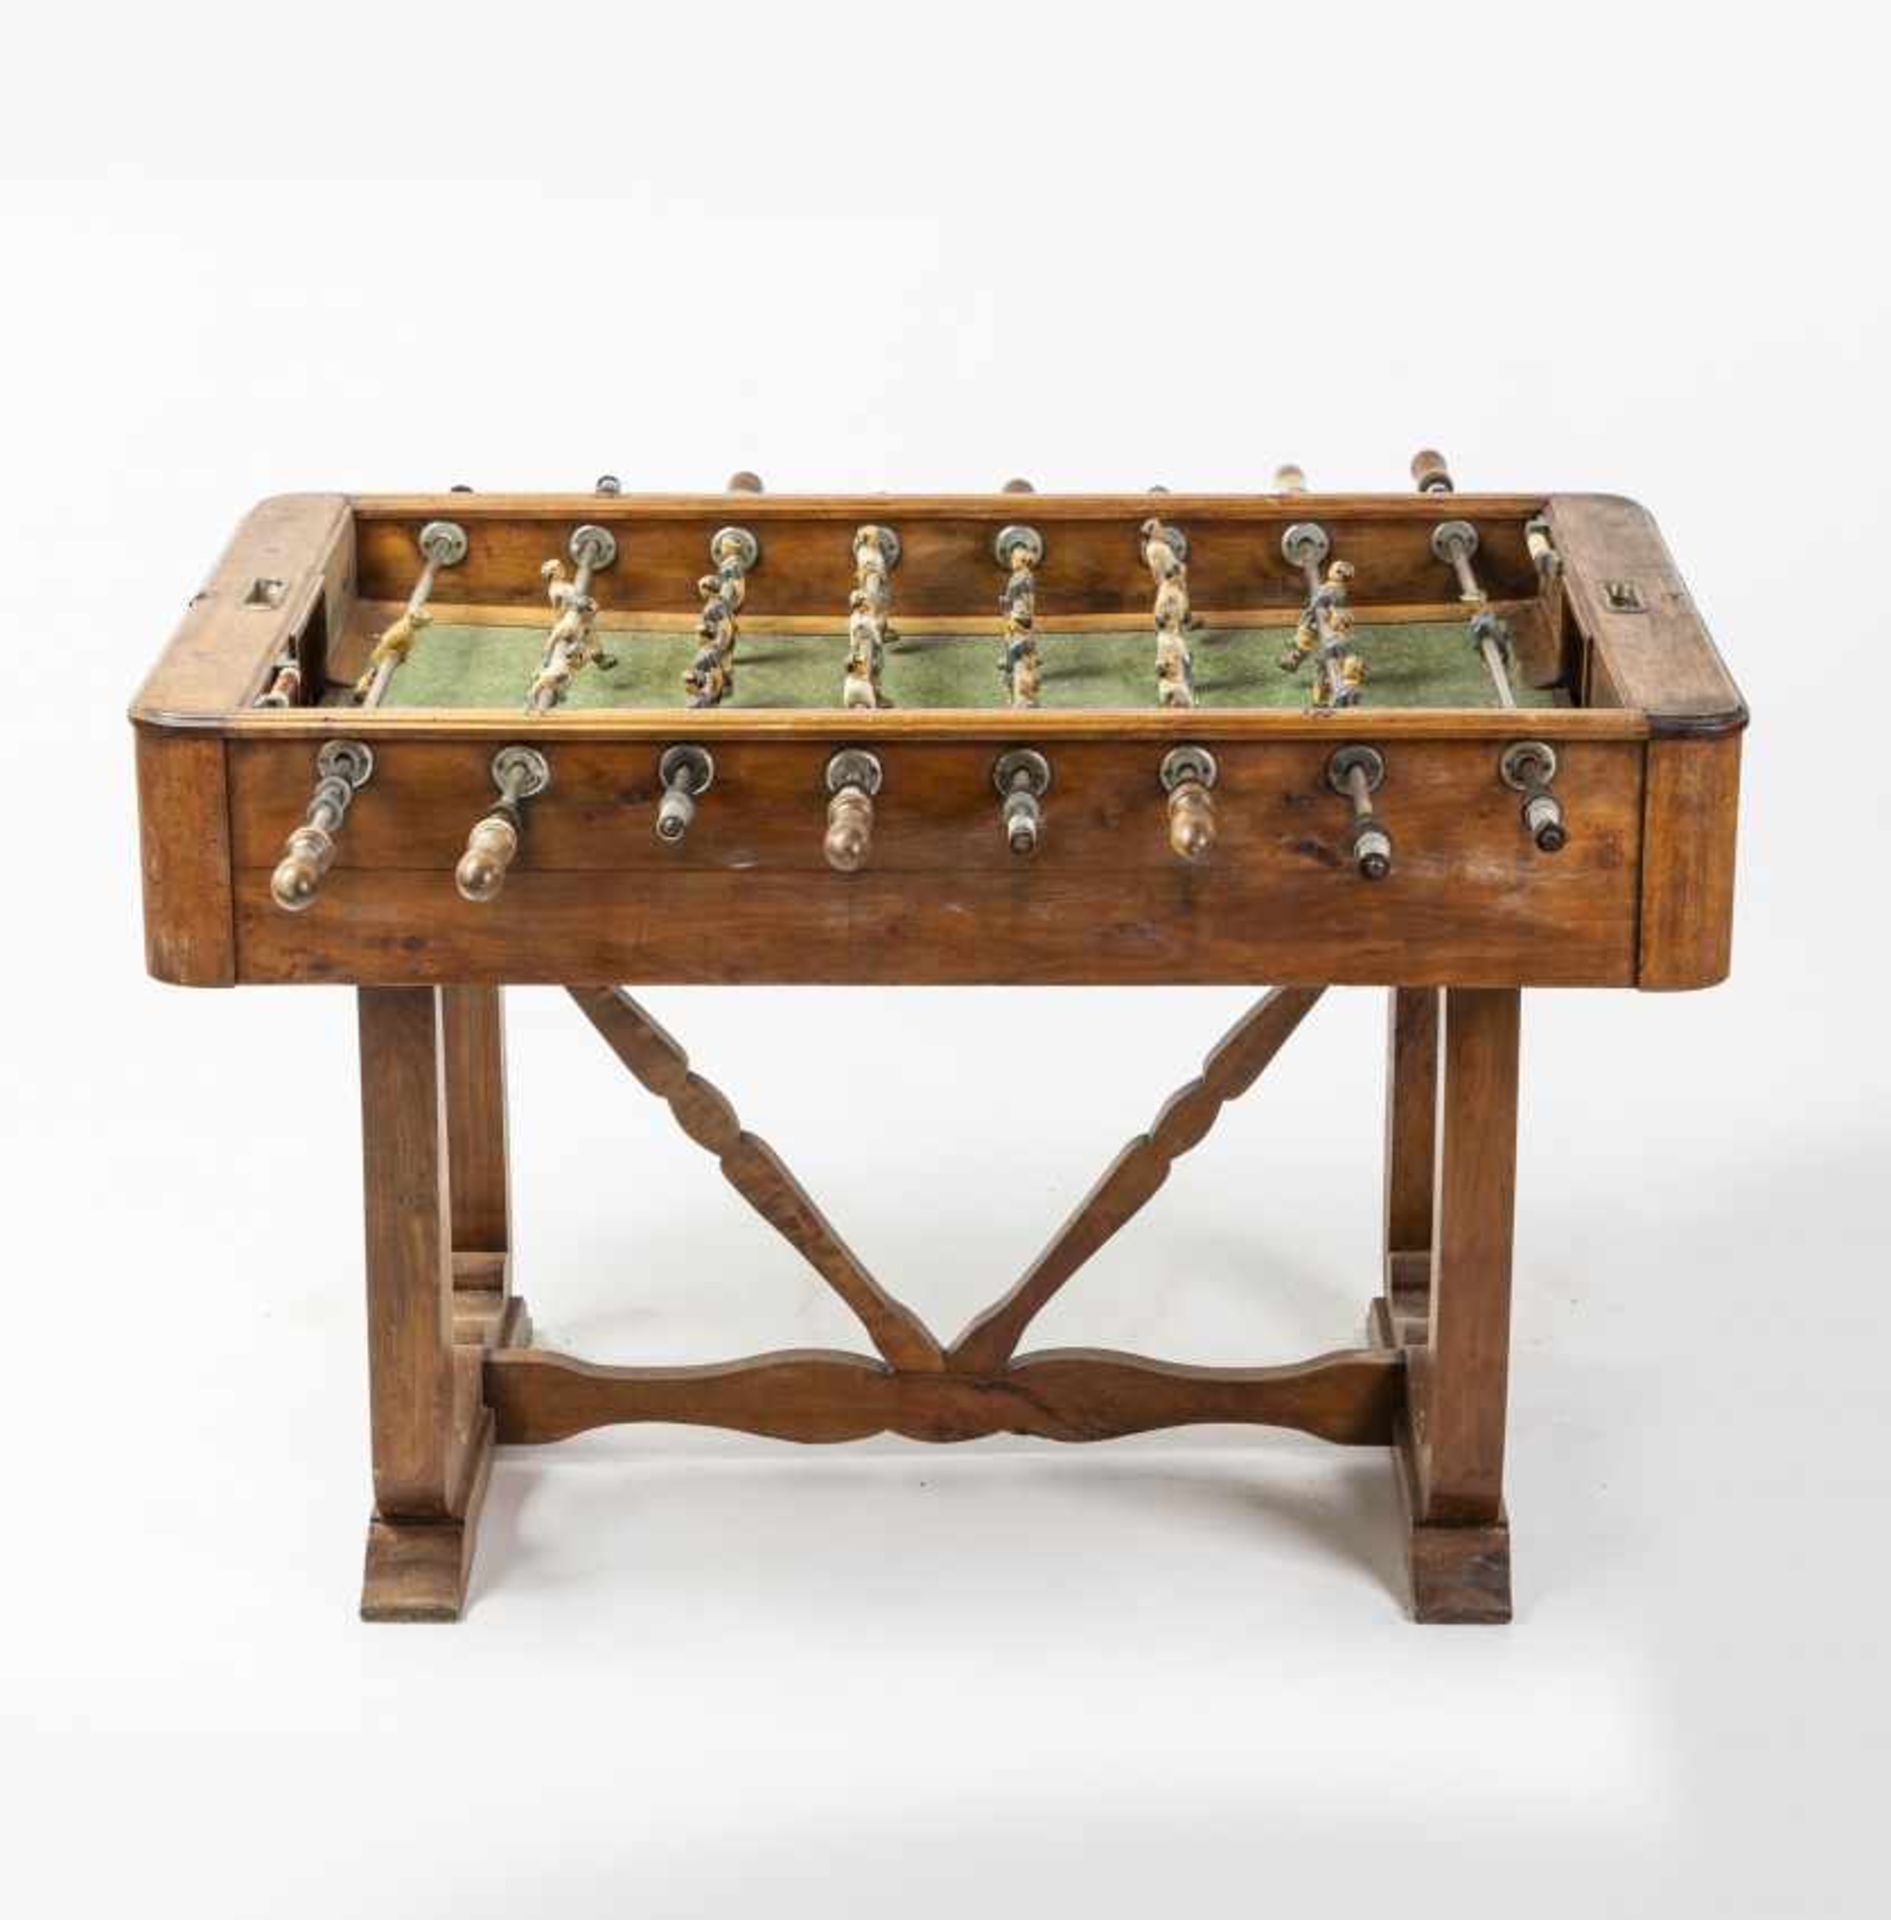 Spanish table football in wood and metal, circa 1940-1950Spanish table football in wood and metal, - Bild 2 aus 7